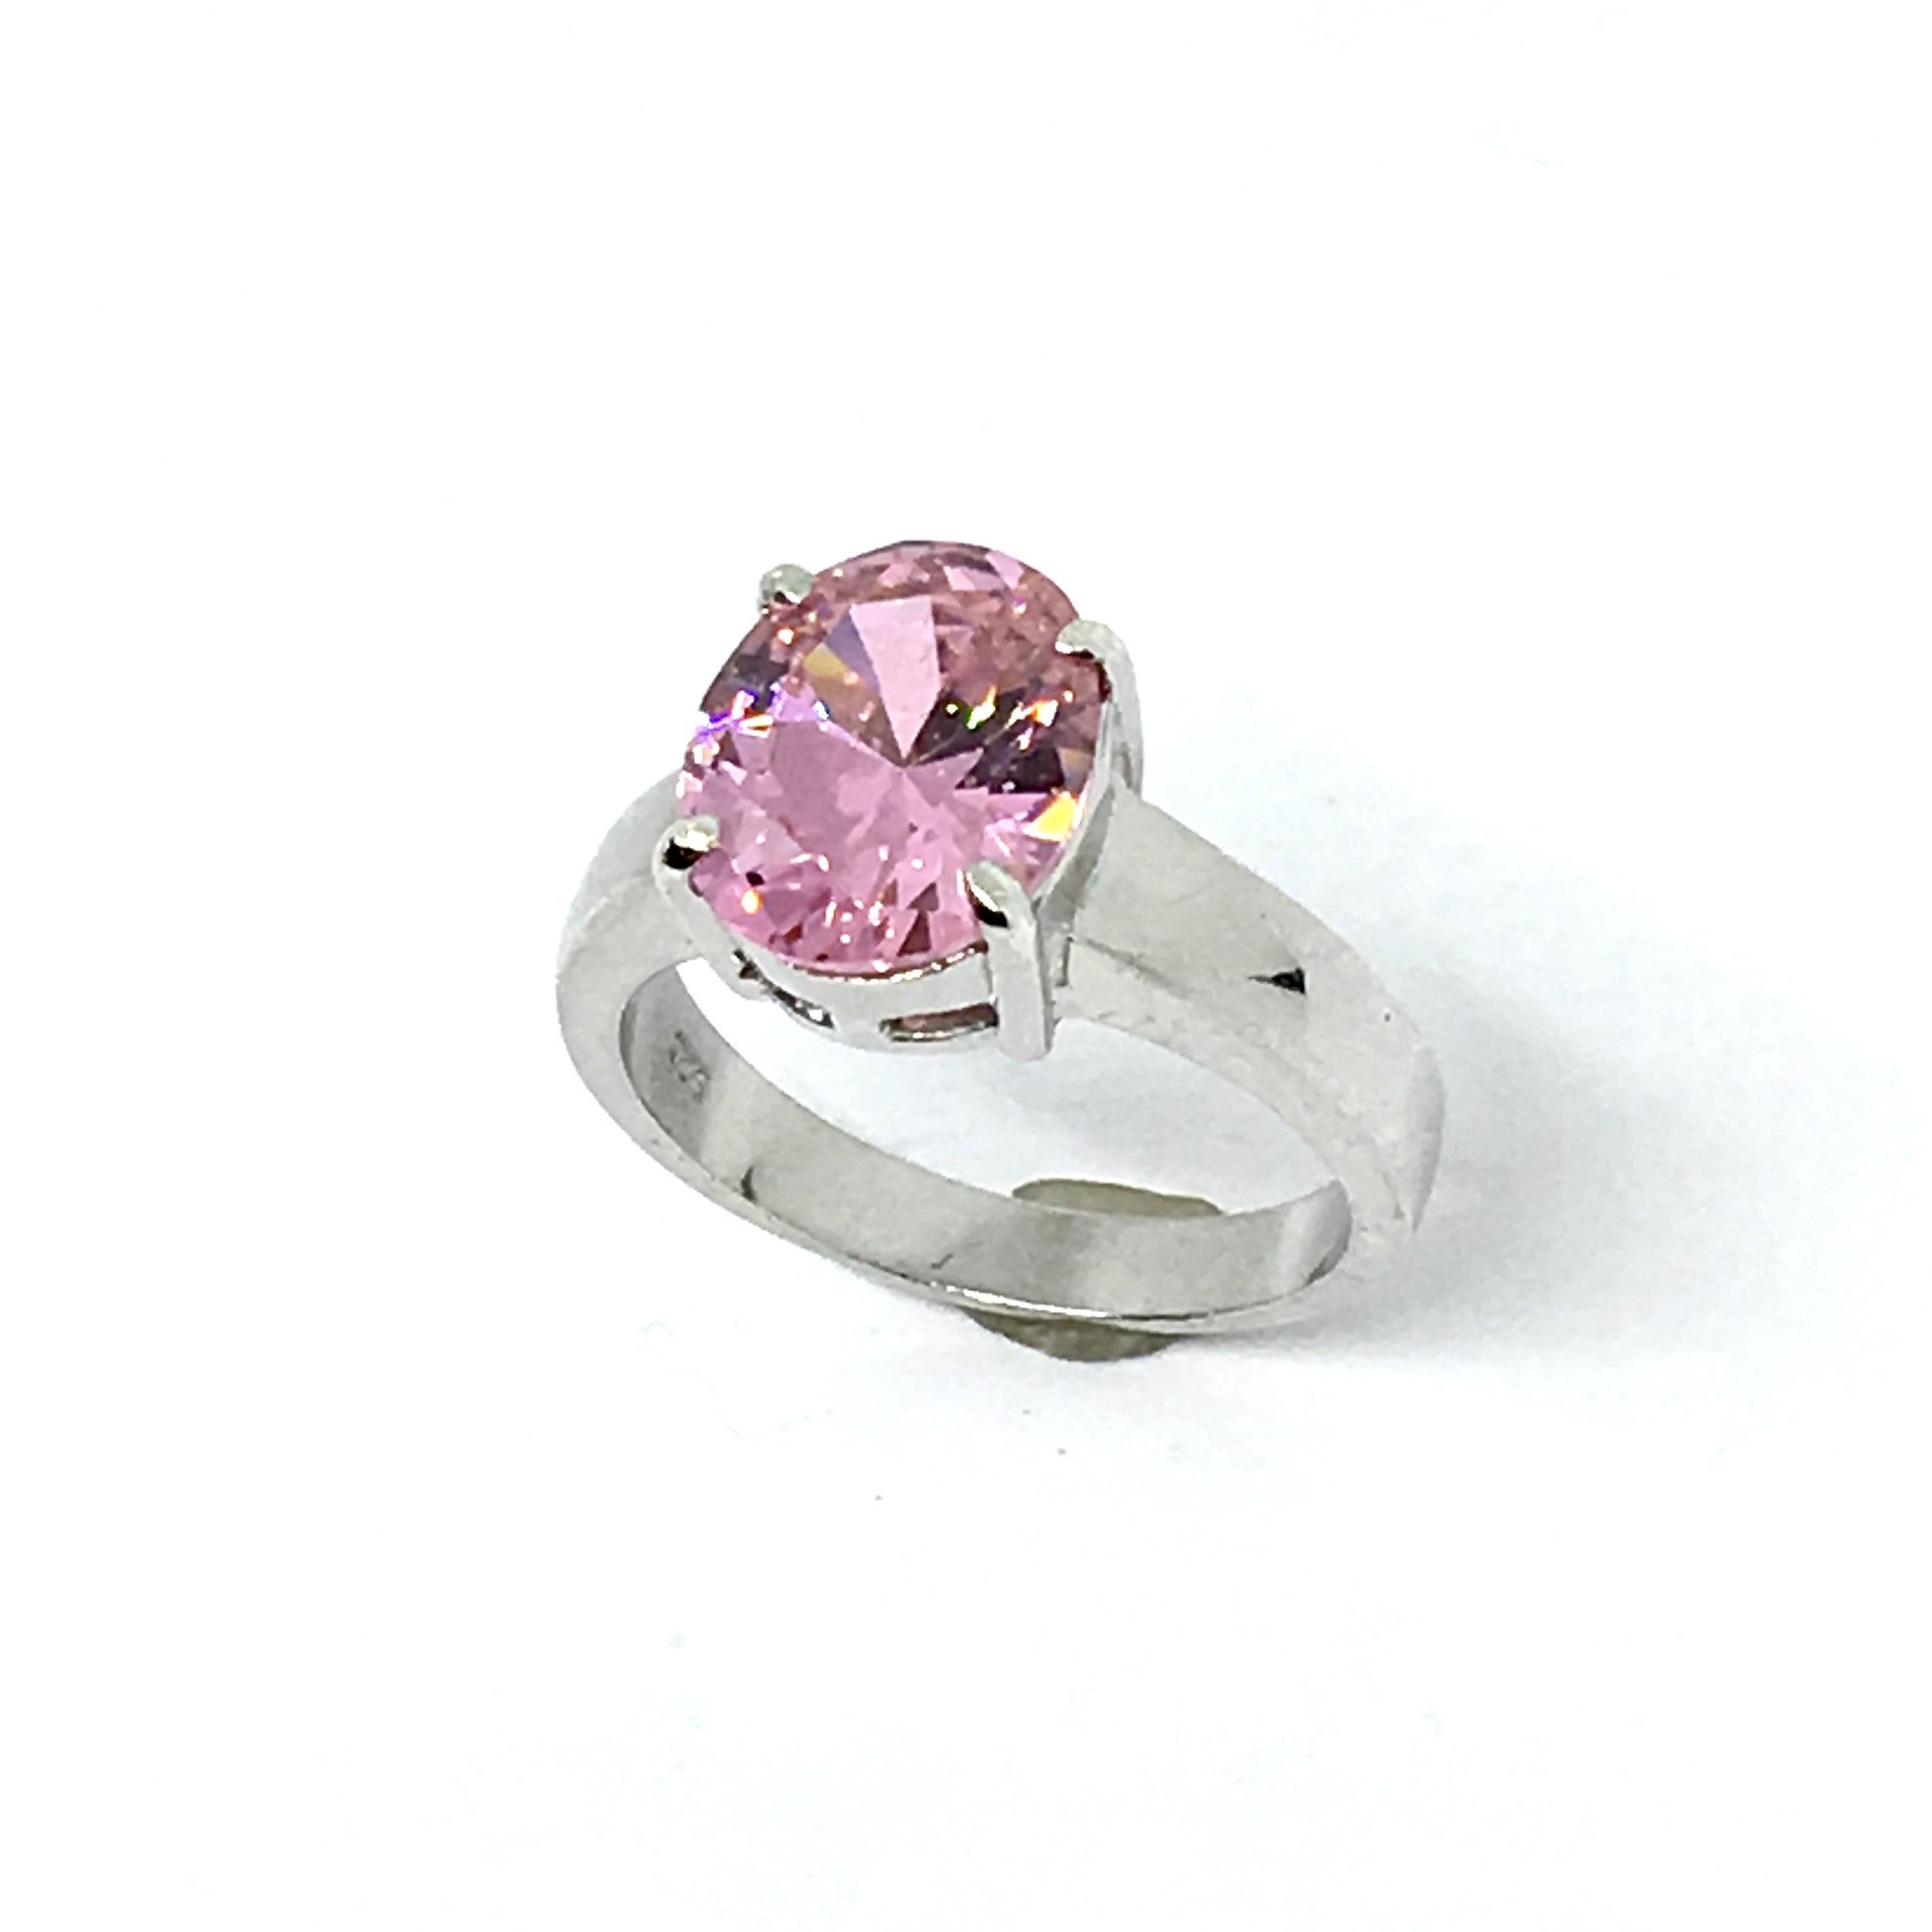 Ring | Womens used Sterling Silver Glittery Pink Zirconia Stone Ring sz 8